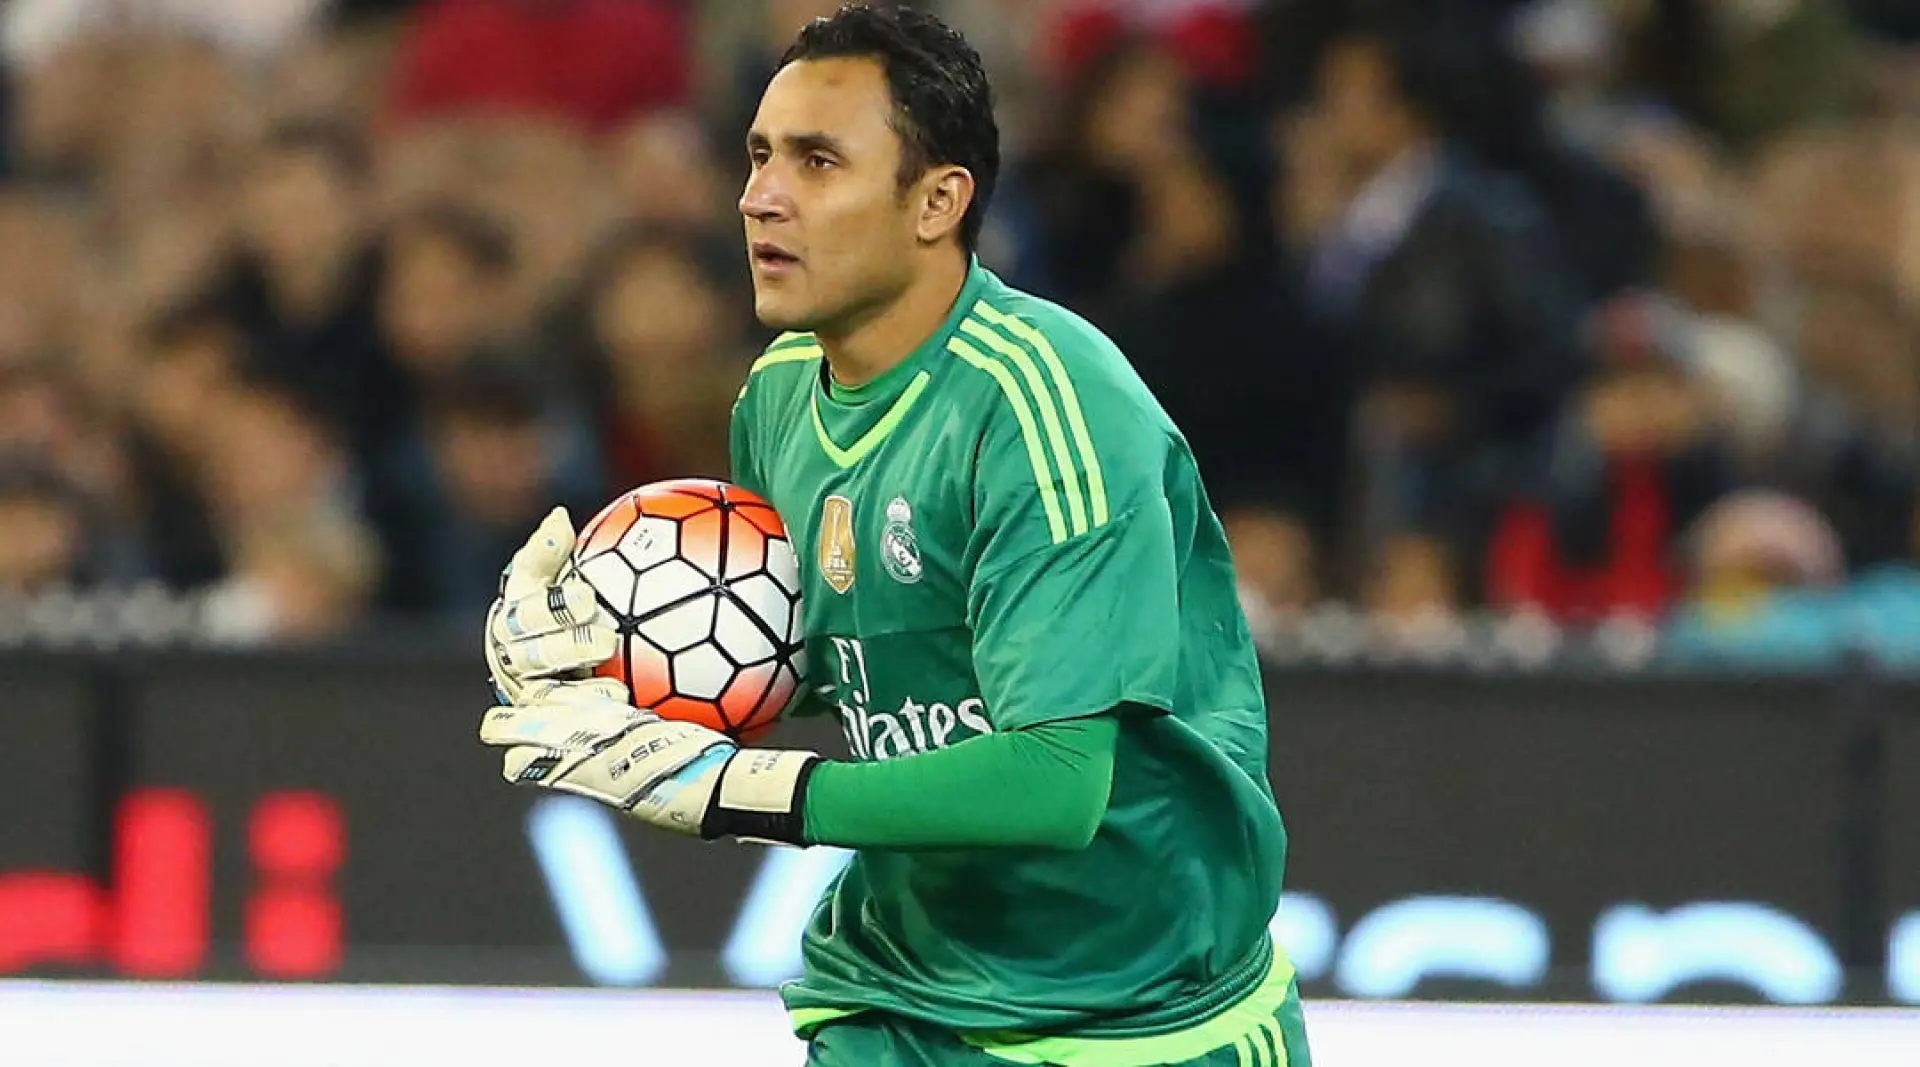 Keylor Navas has been in excellent form for Real Madrid